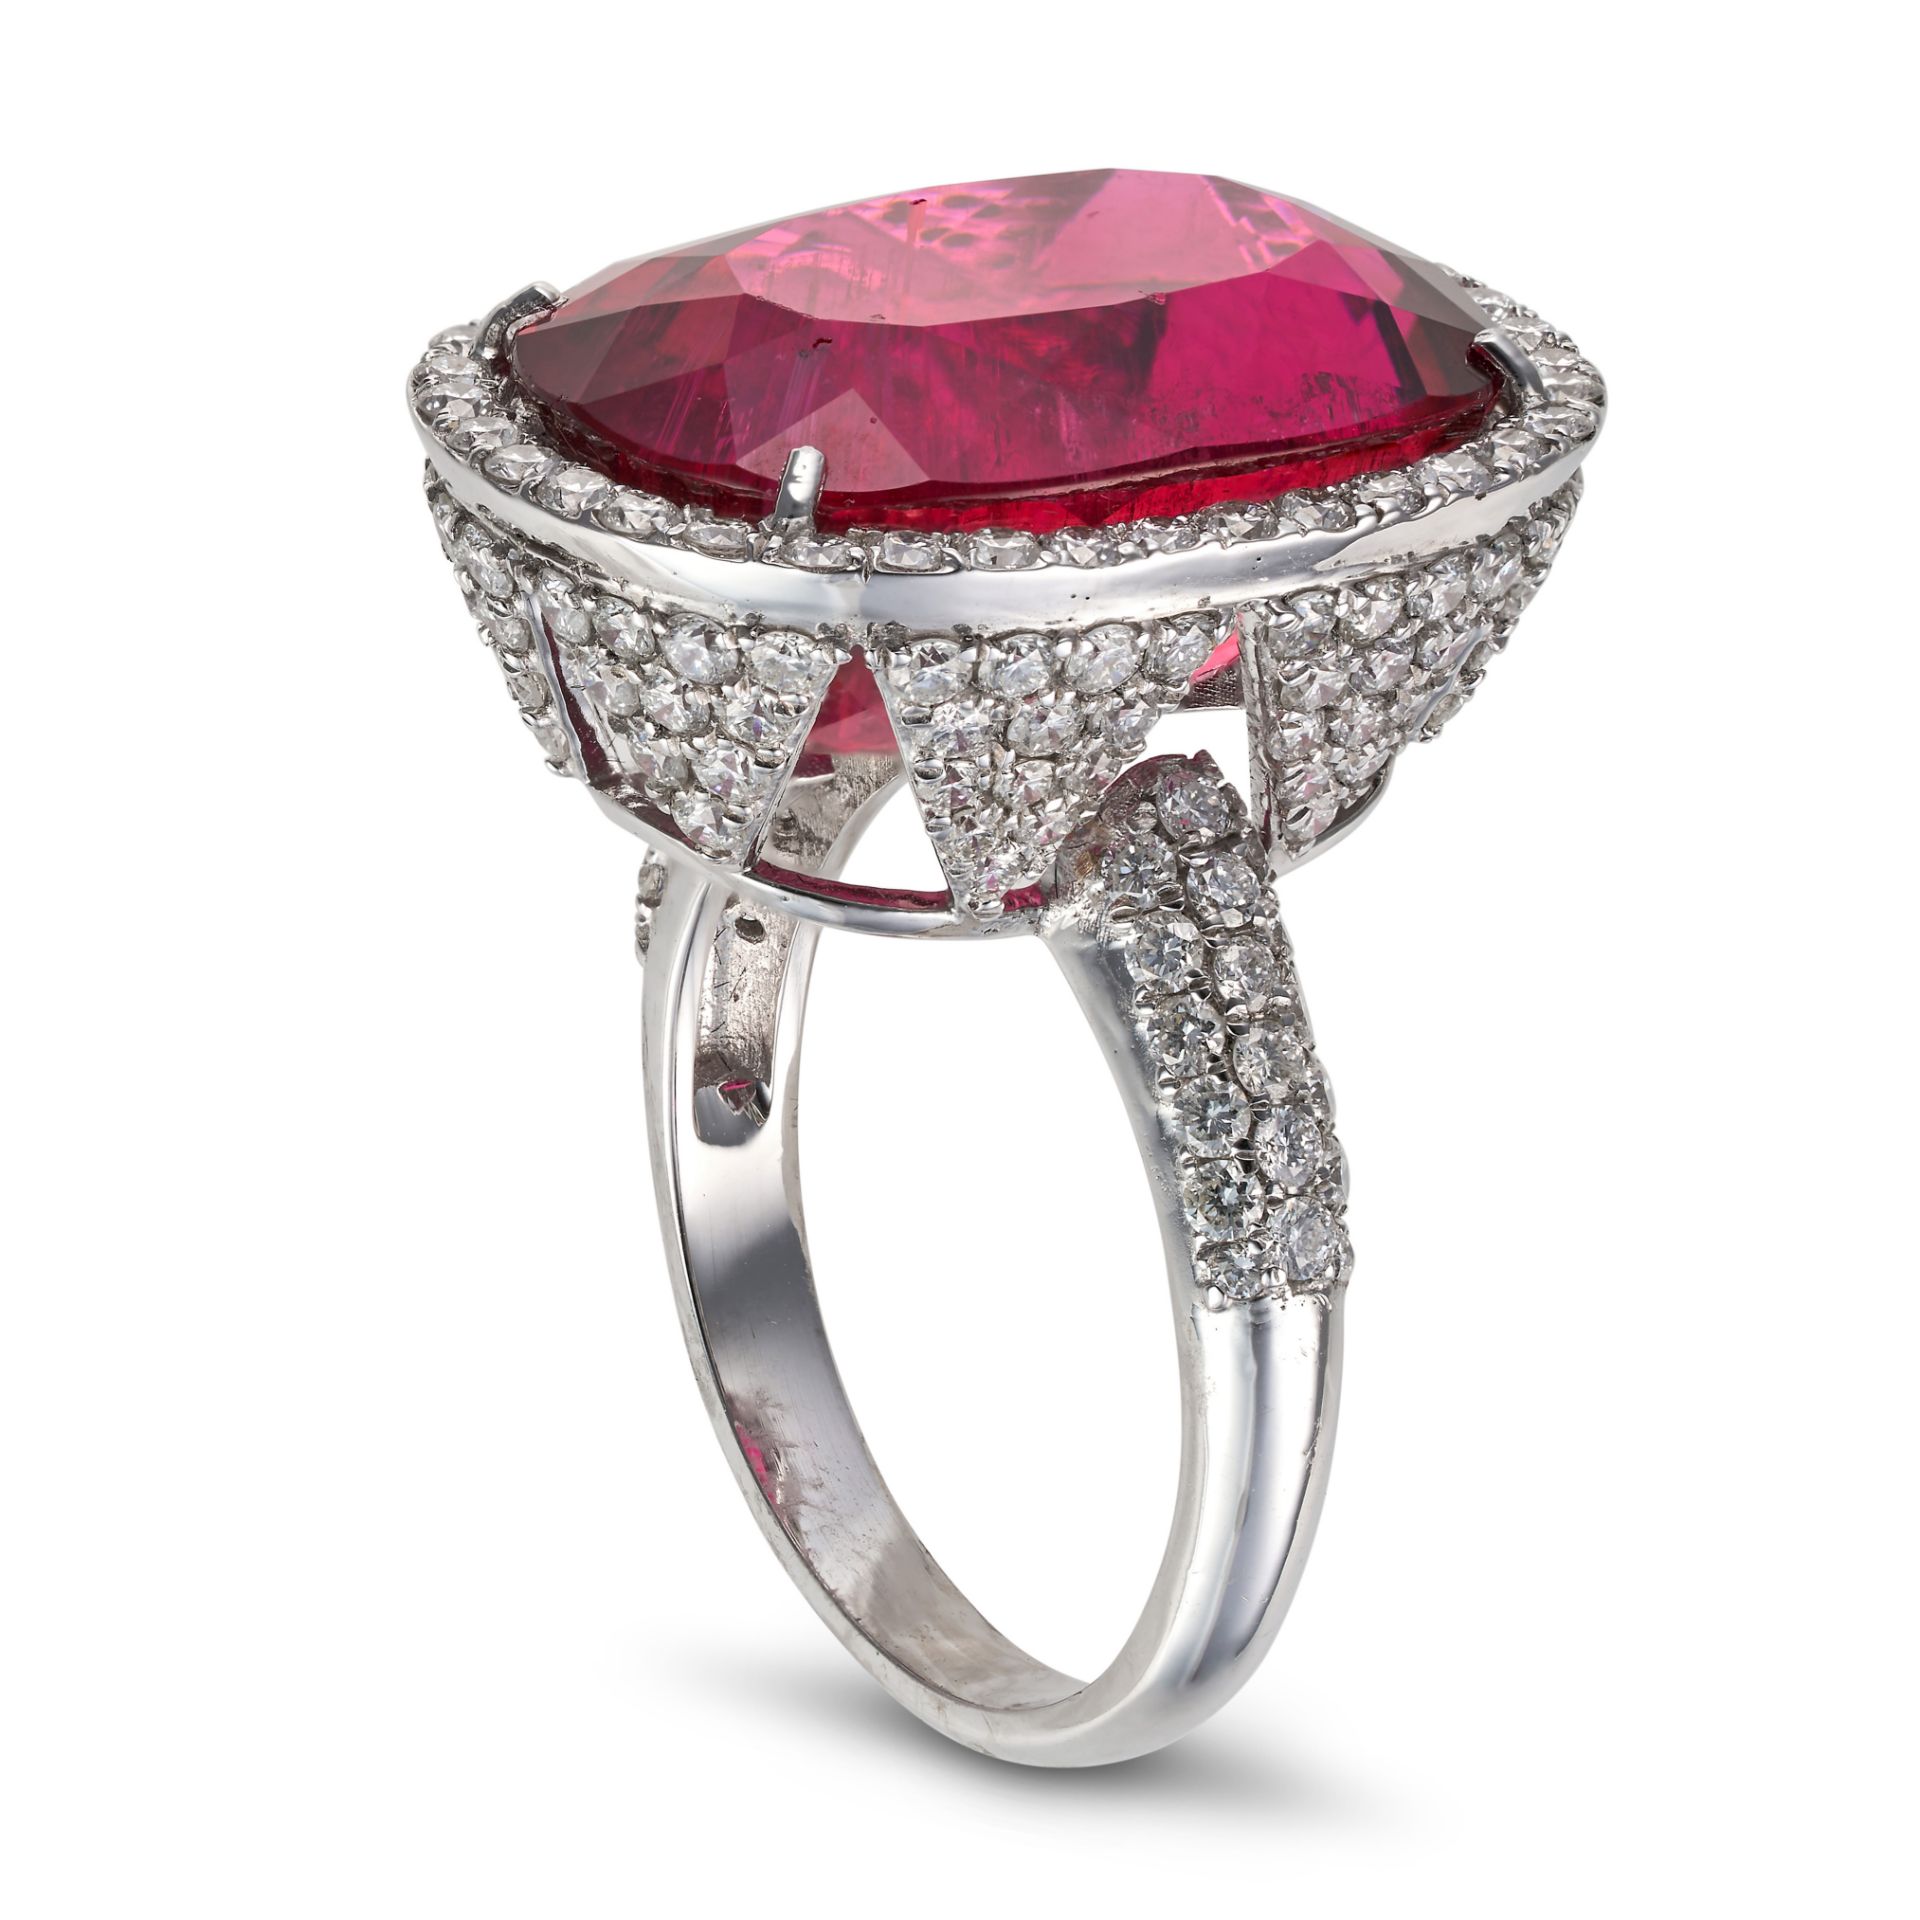 A RUBELLITE TOURMALINE AND DIAMOND RING set with a cushion cut rubellite tourmaline of 18.70 cara... - Image 2 of 2